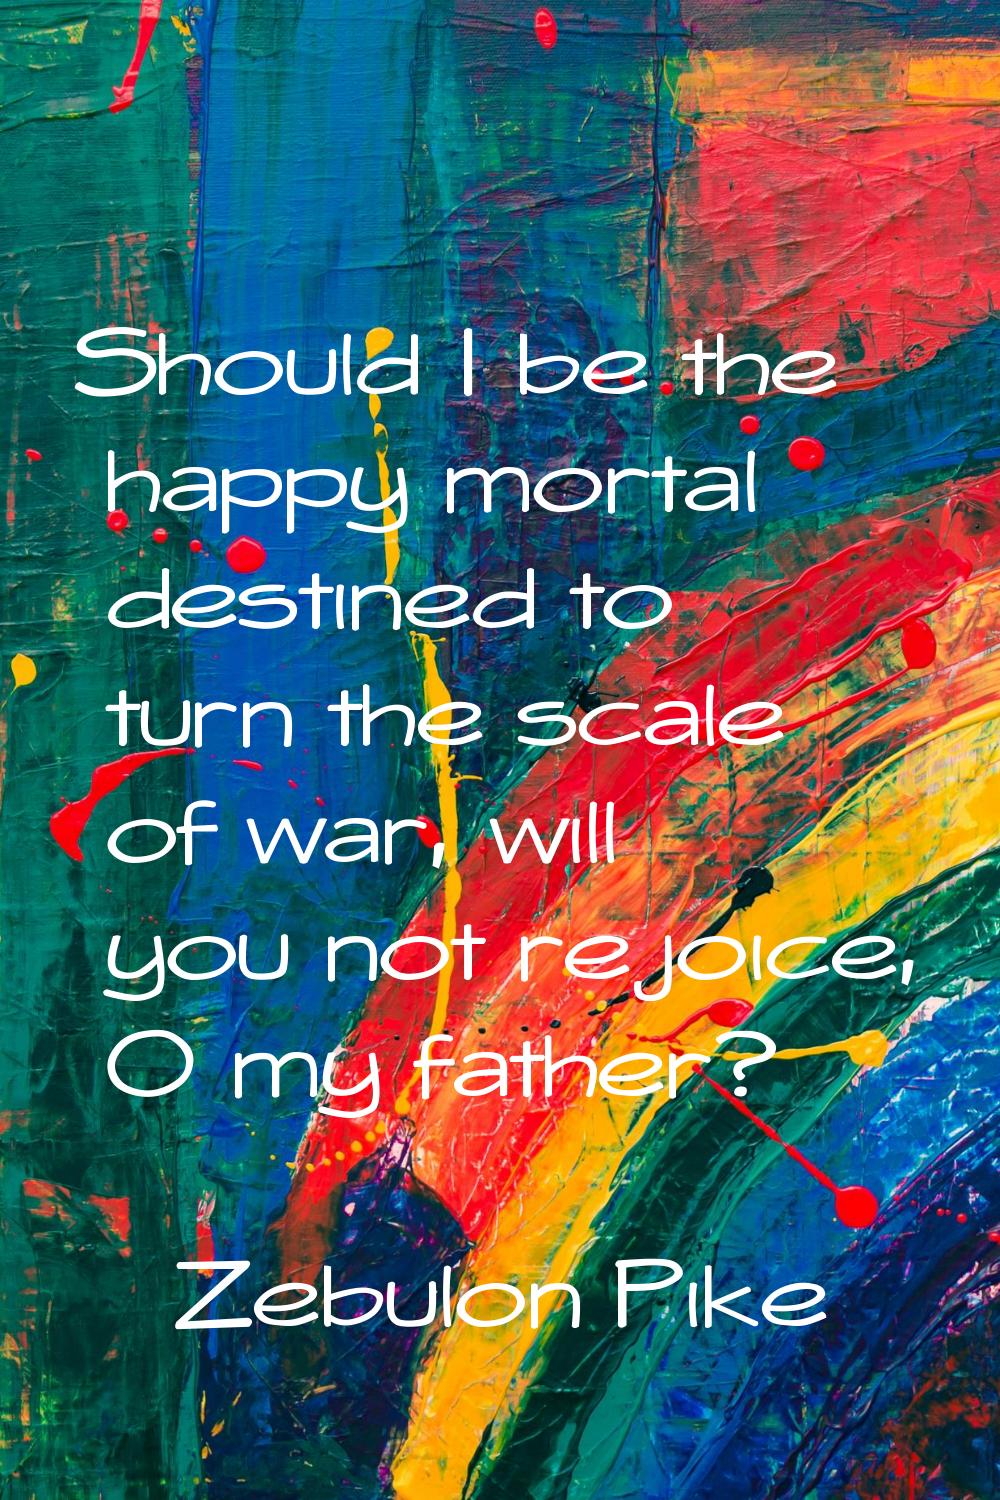 Should I be the happy mortal destined to turn the scale of war, will you not rejoice, O my father?